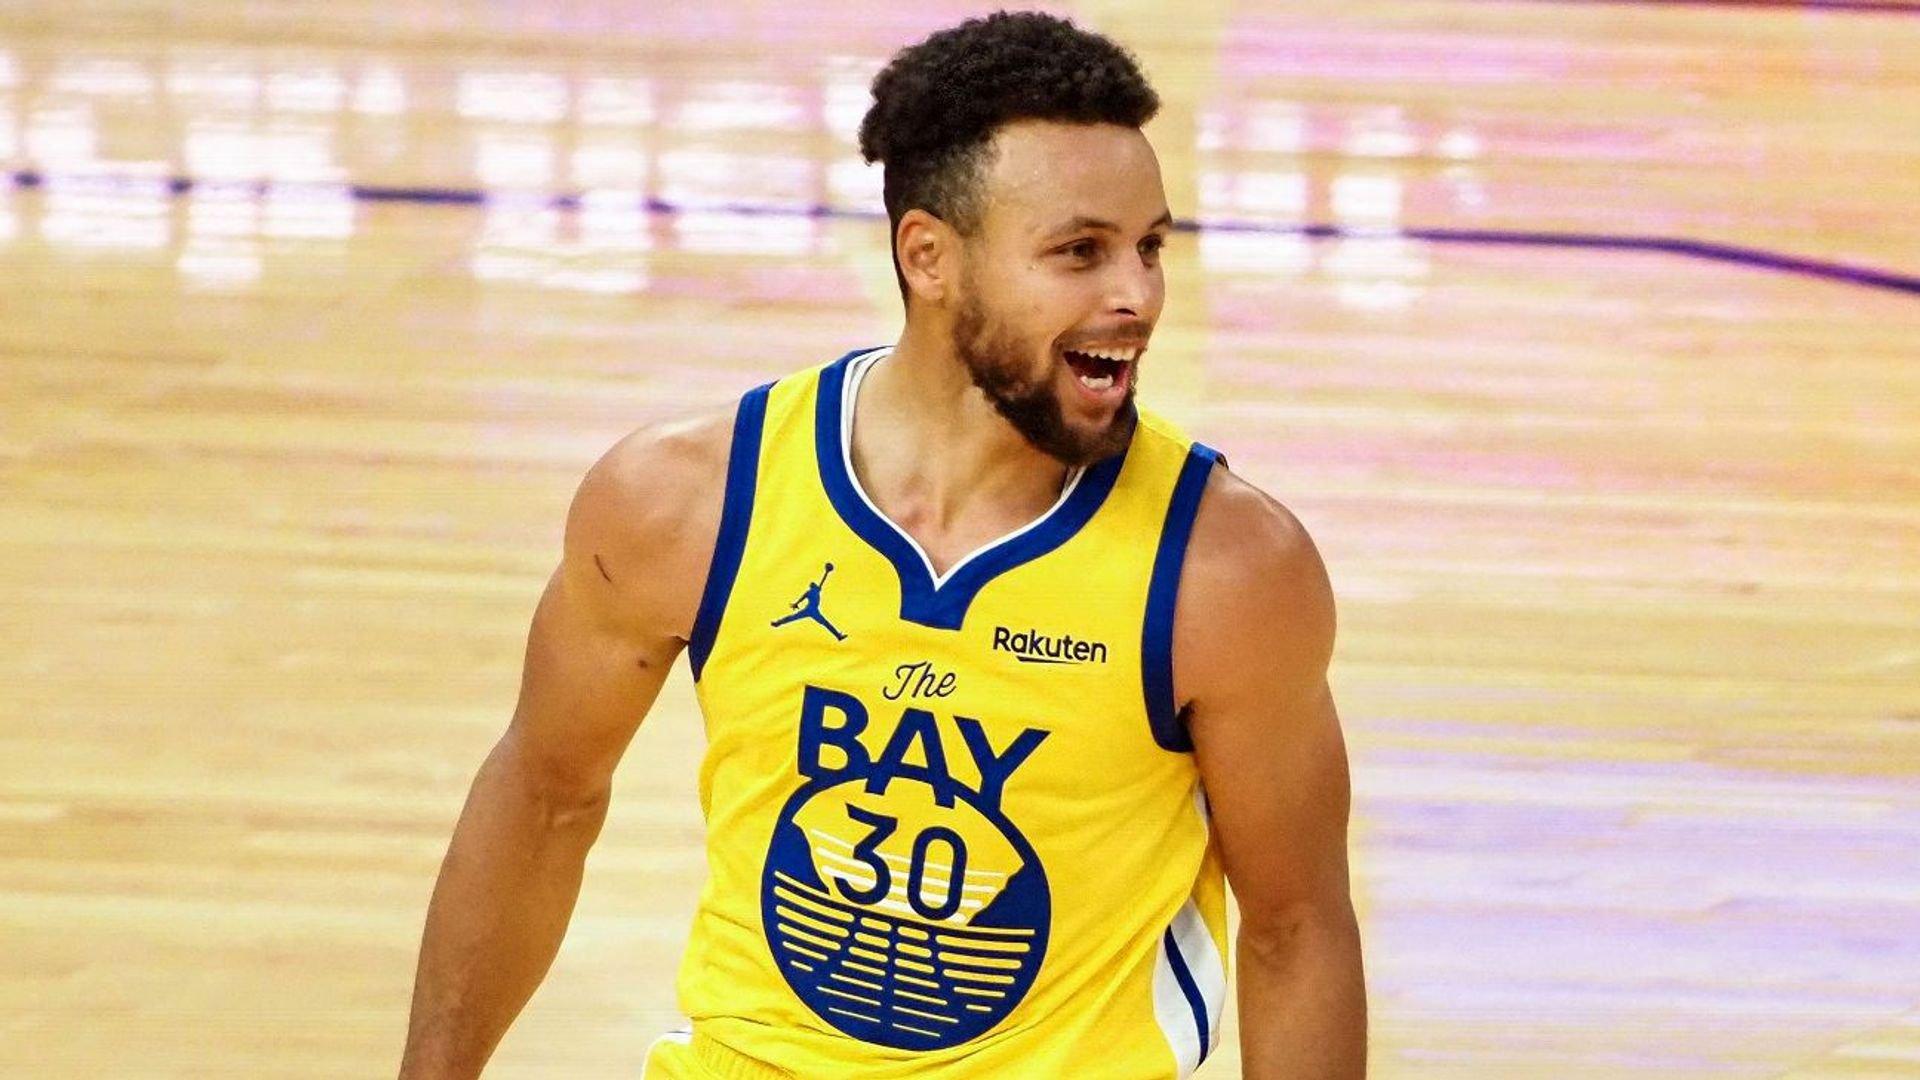 Paul, Curry Favorites to Win NBA All-Star Competitions